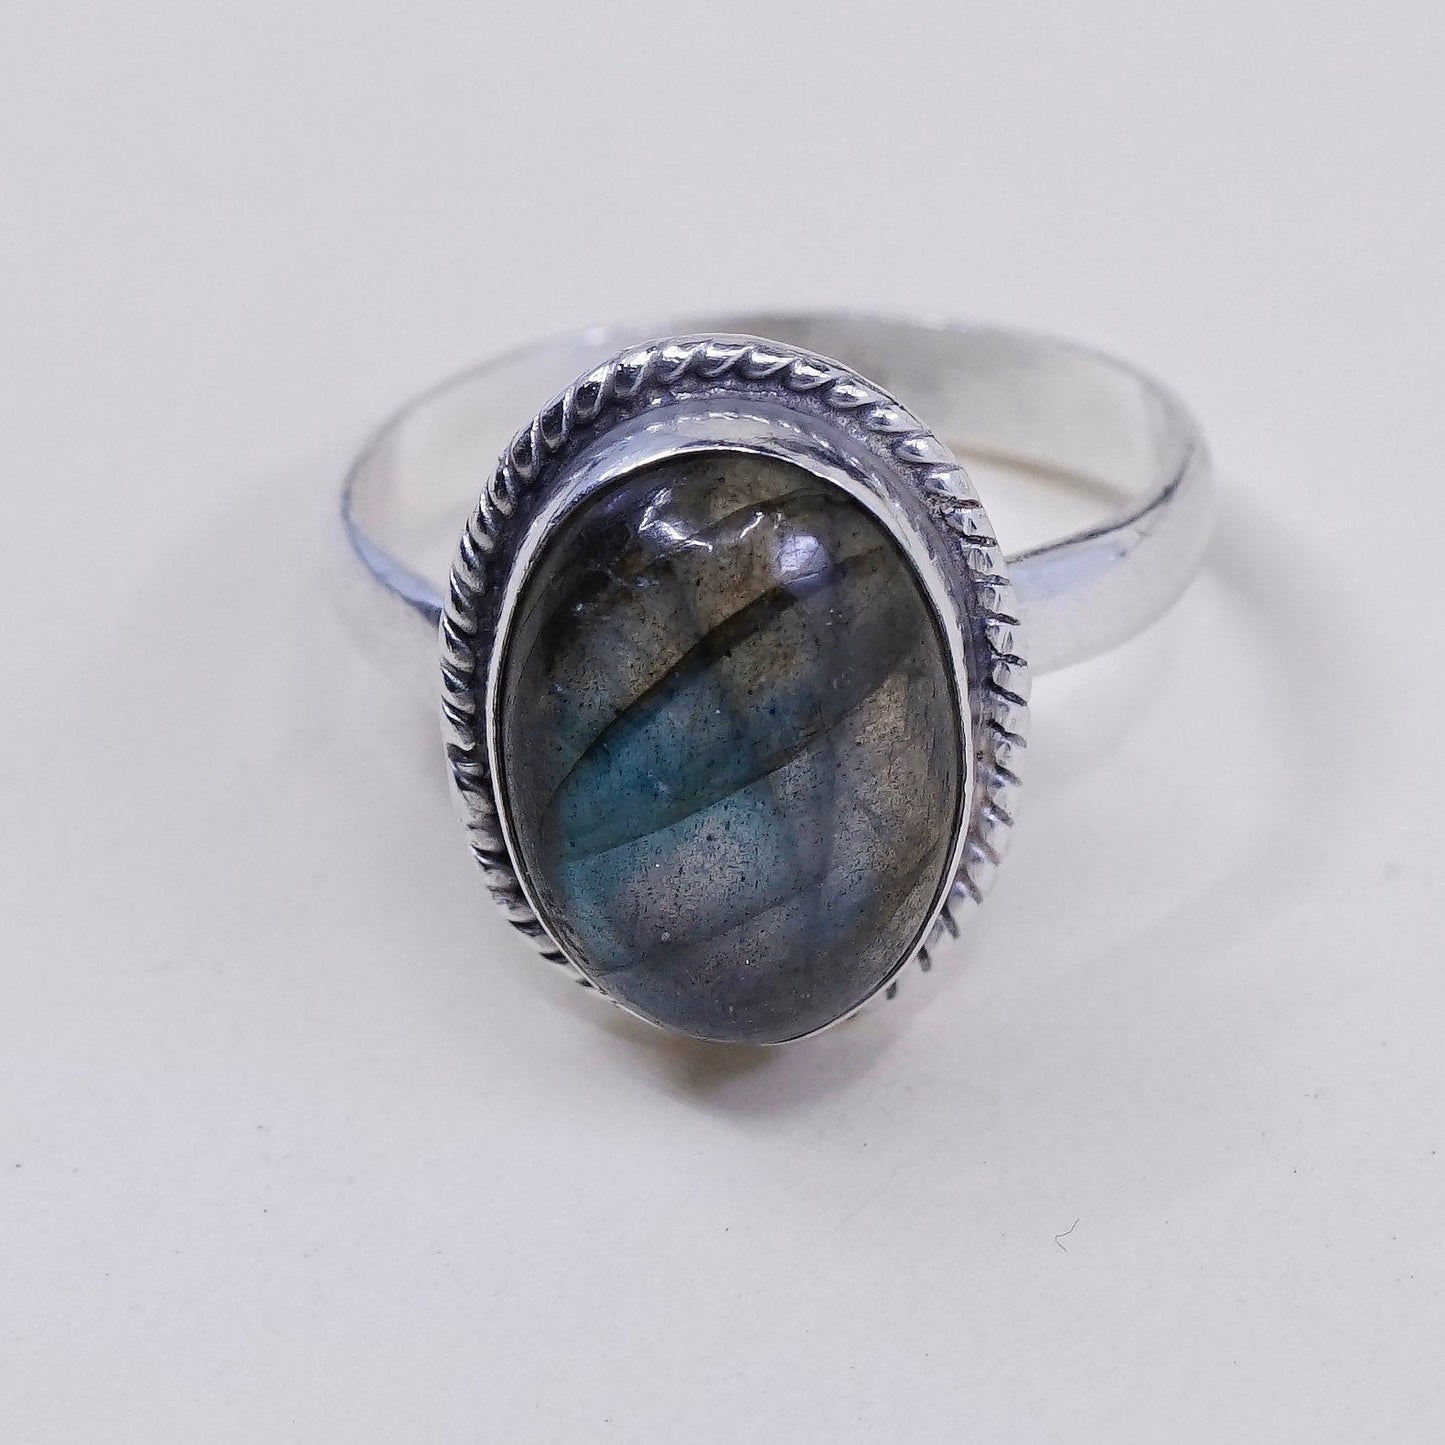 Size 6.75, vintage Sterling silver handmade ring, 925 with oval labradorite